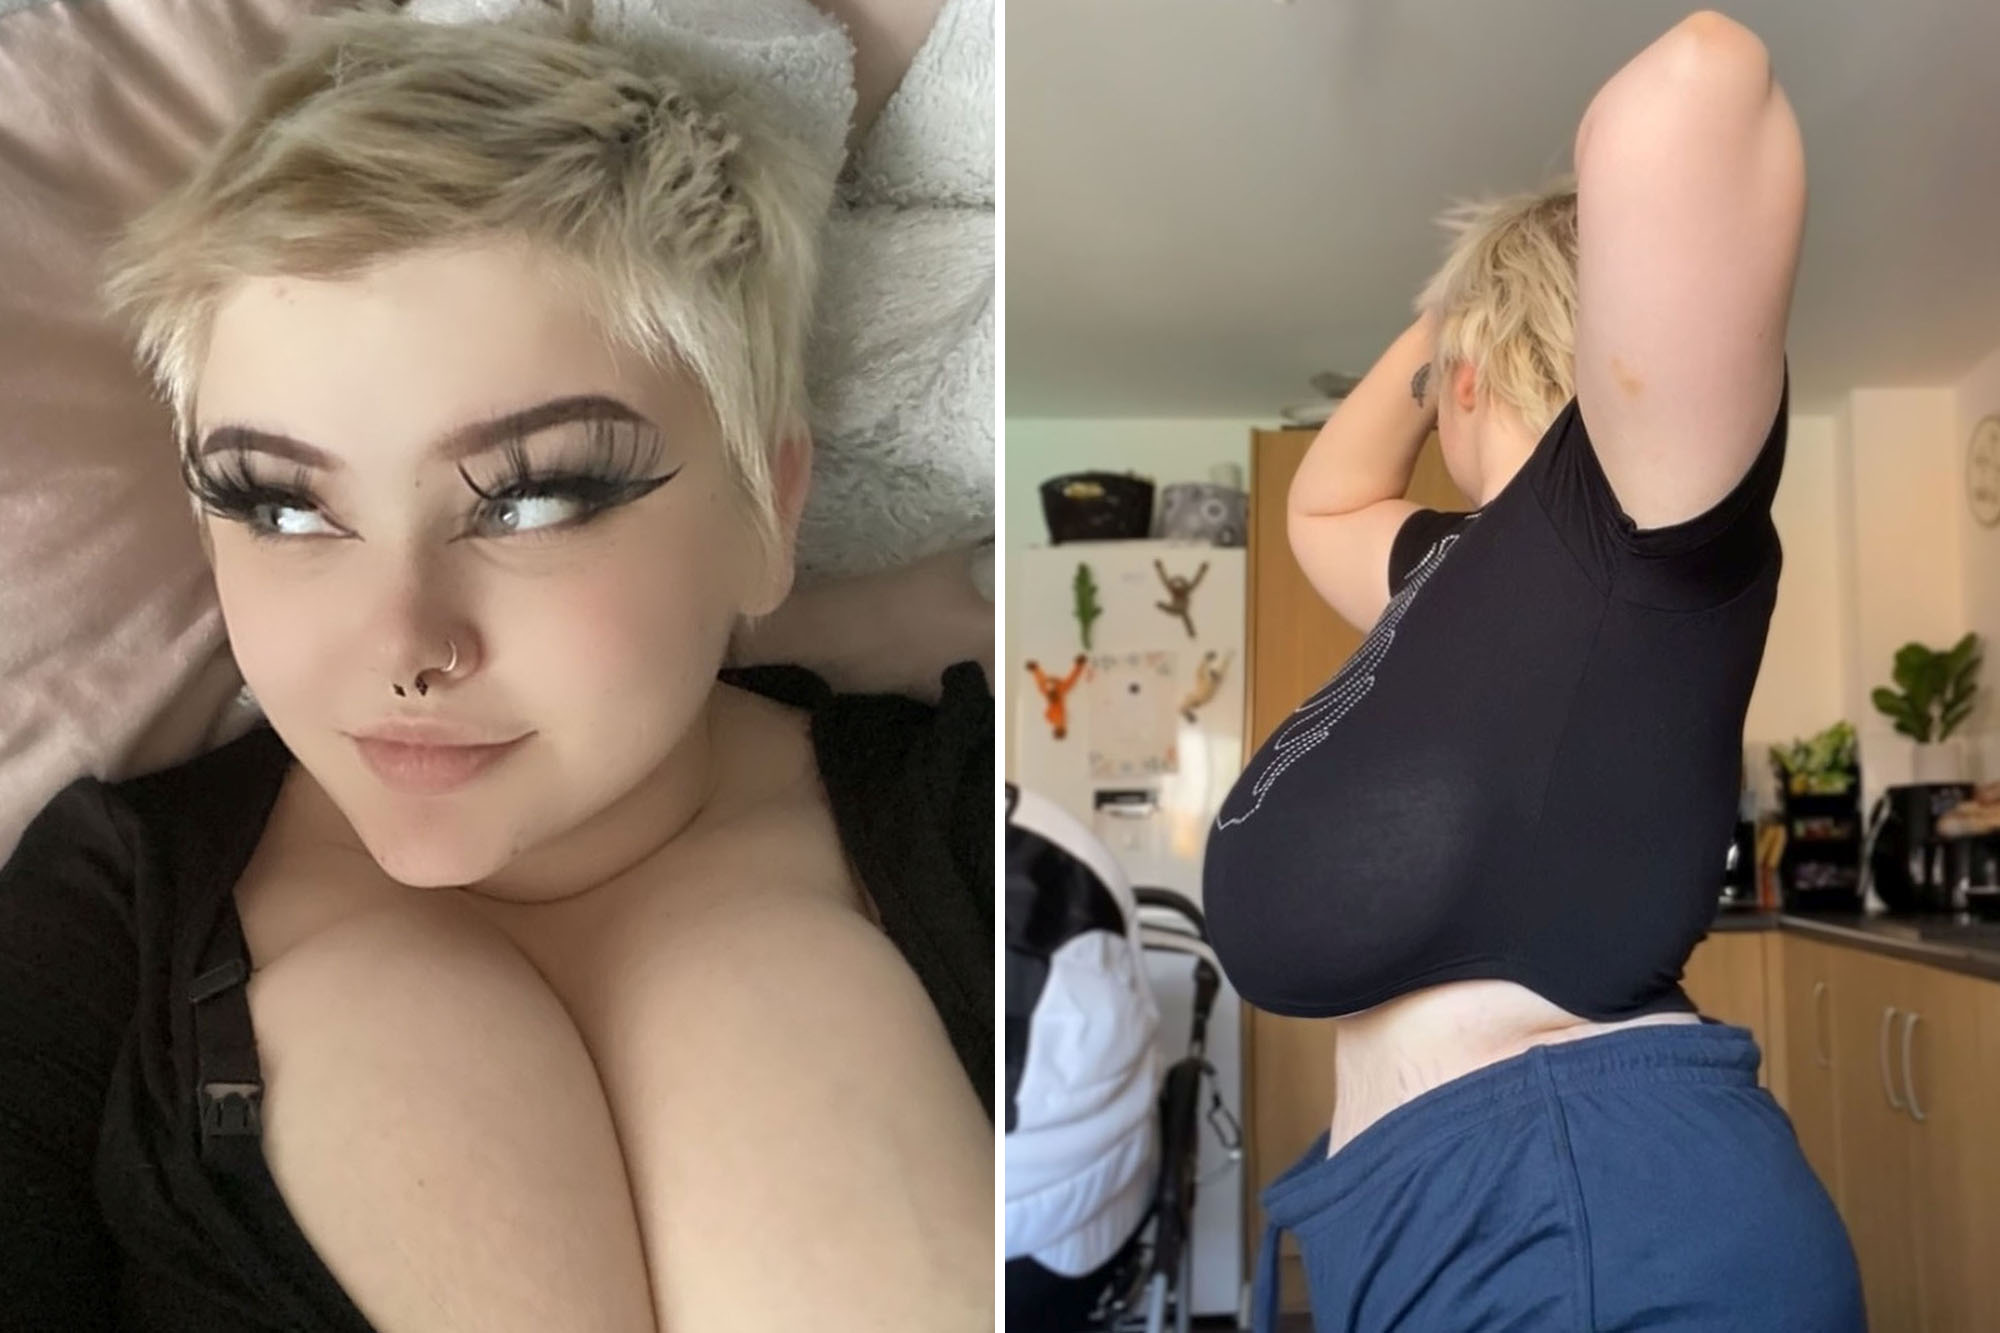 annie haskins recommends Young Big Saggy Boobs